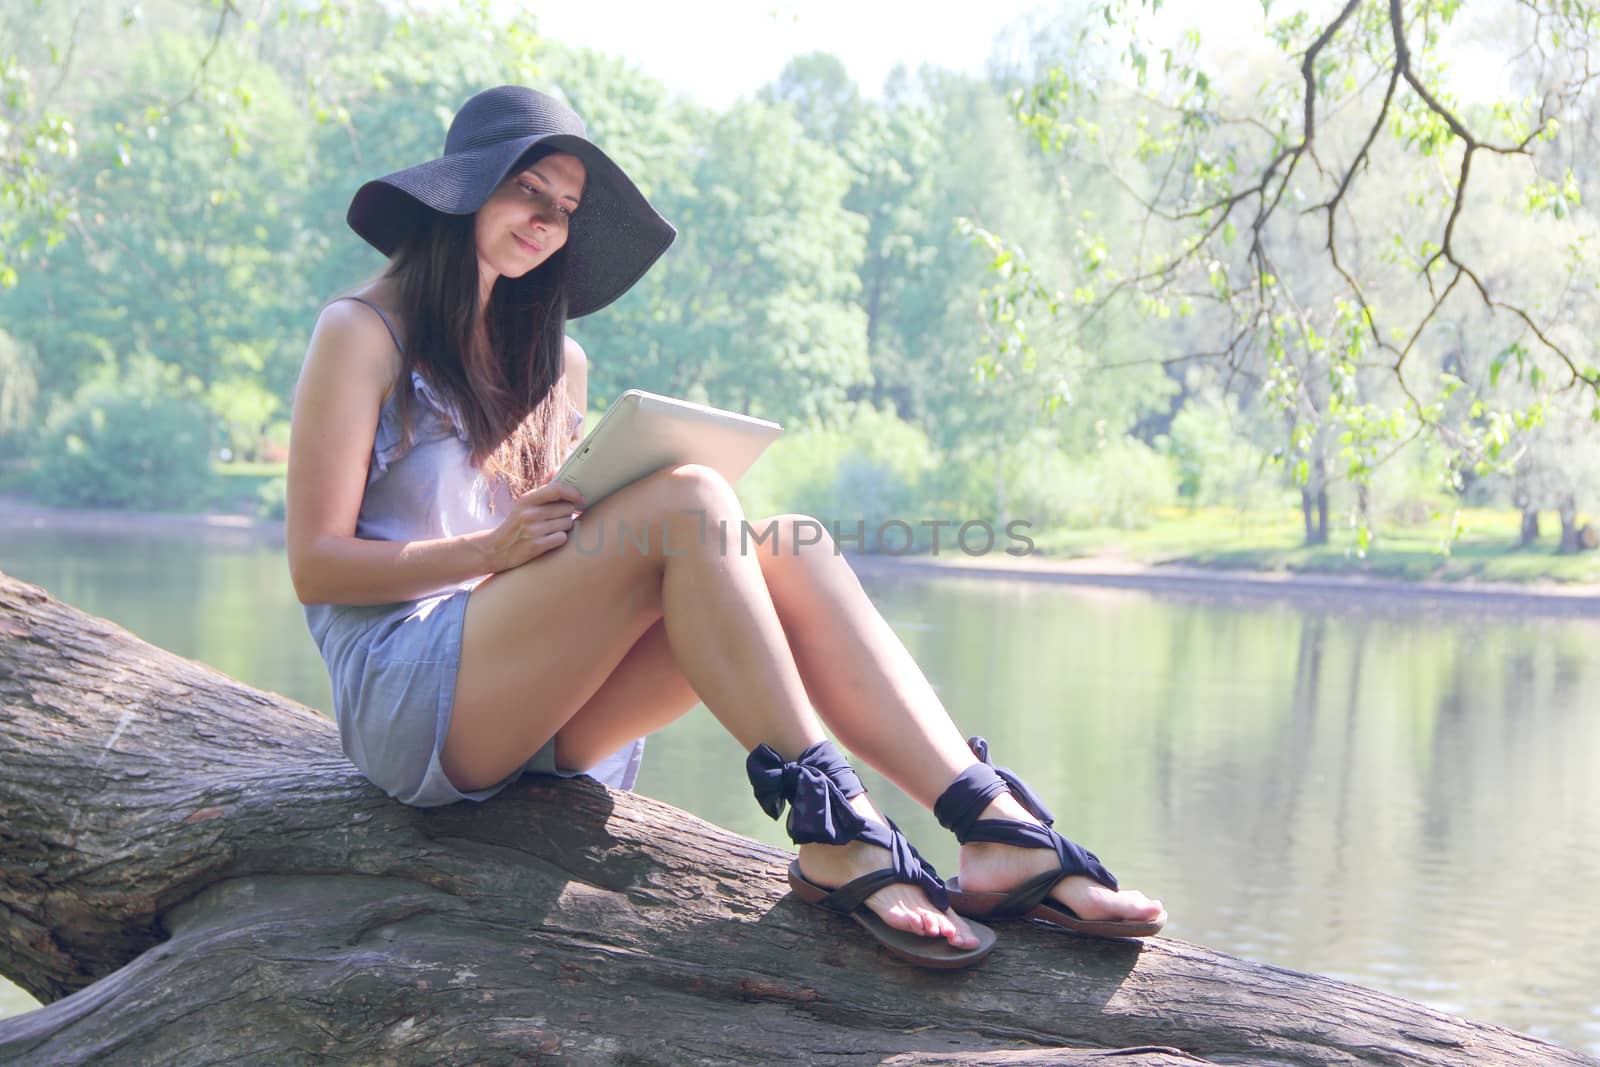 Young woman using tablet outdoor sitting on tree in park